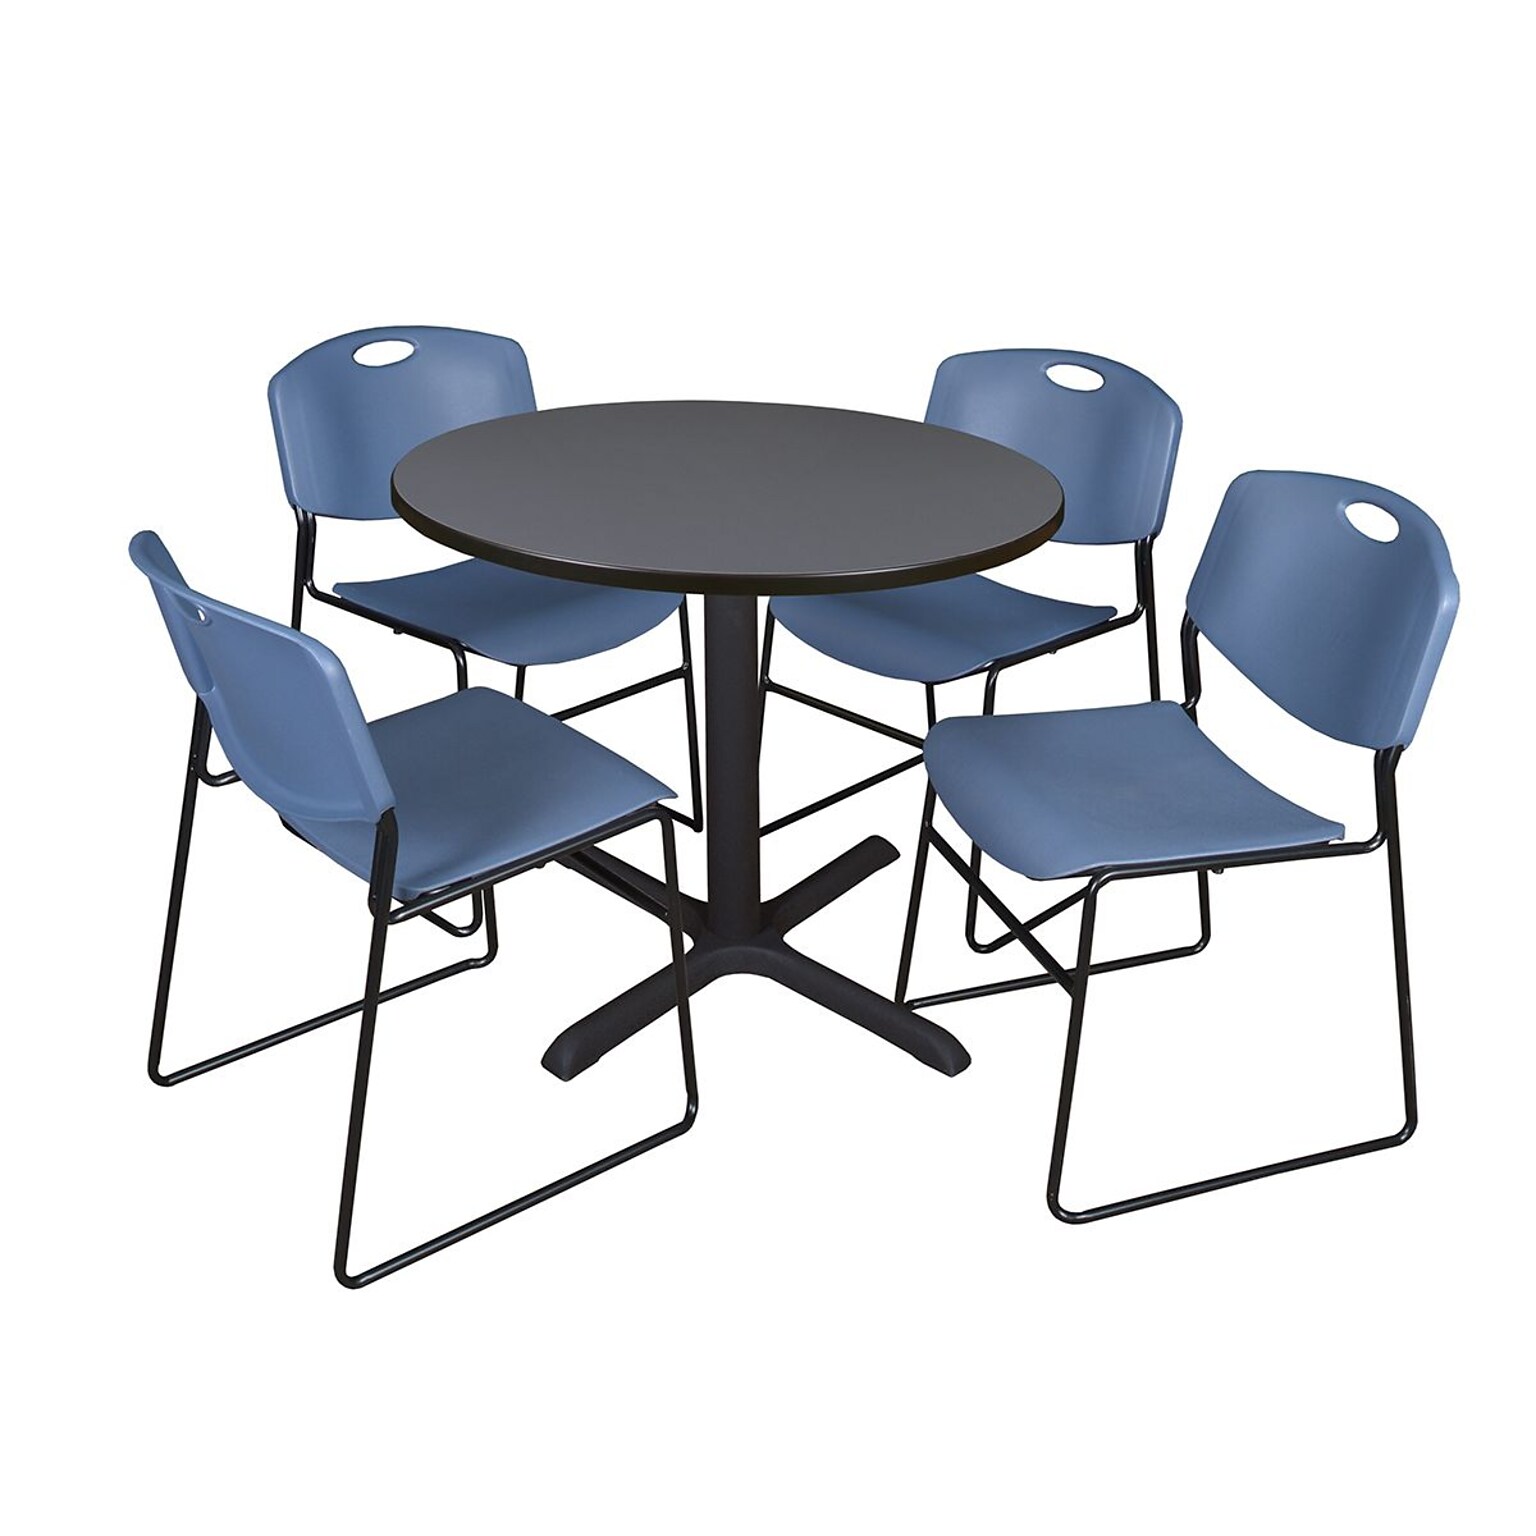 Regency 36-inch Training & Hospitality Round Shape Laminate Table with 4 Chairs, Blue (TB36RNDGY44BE)